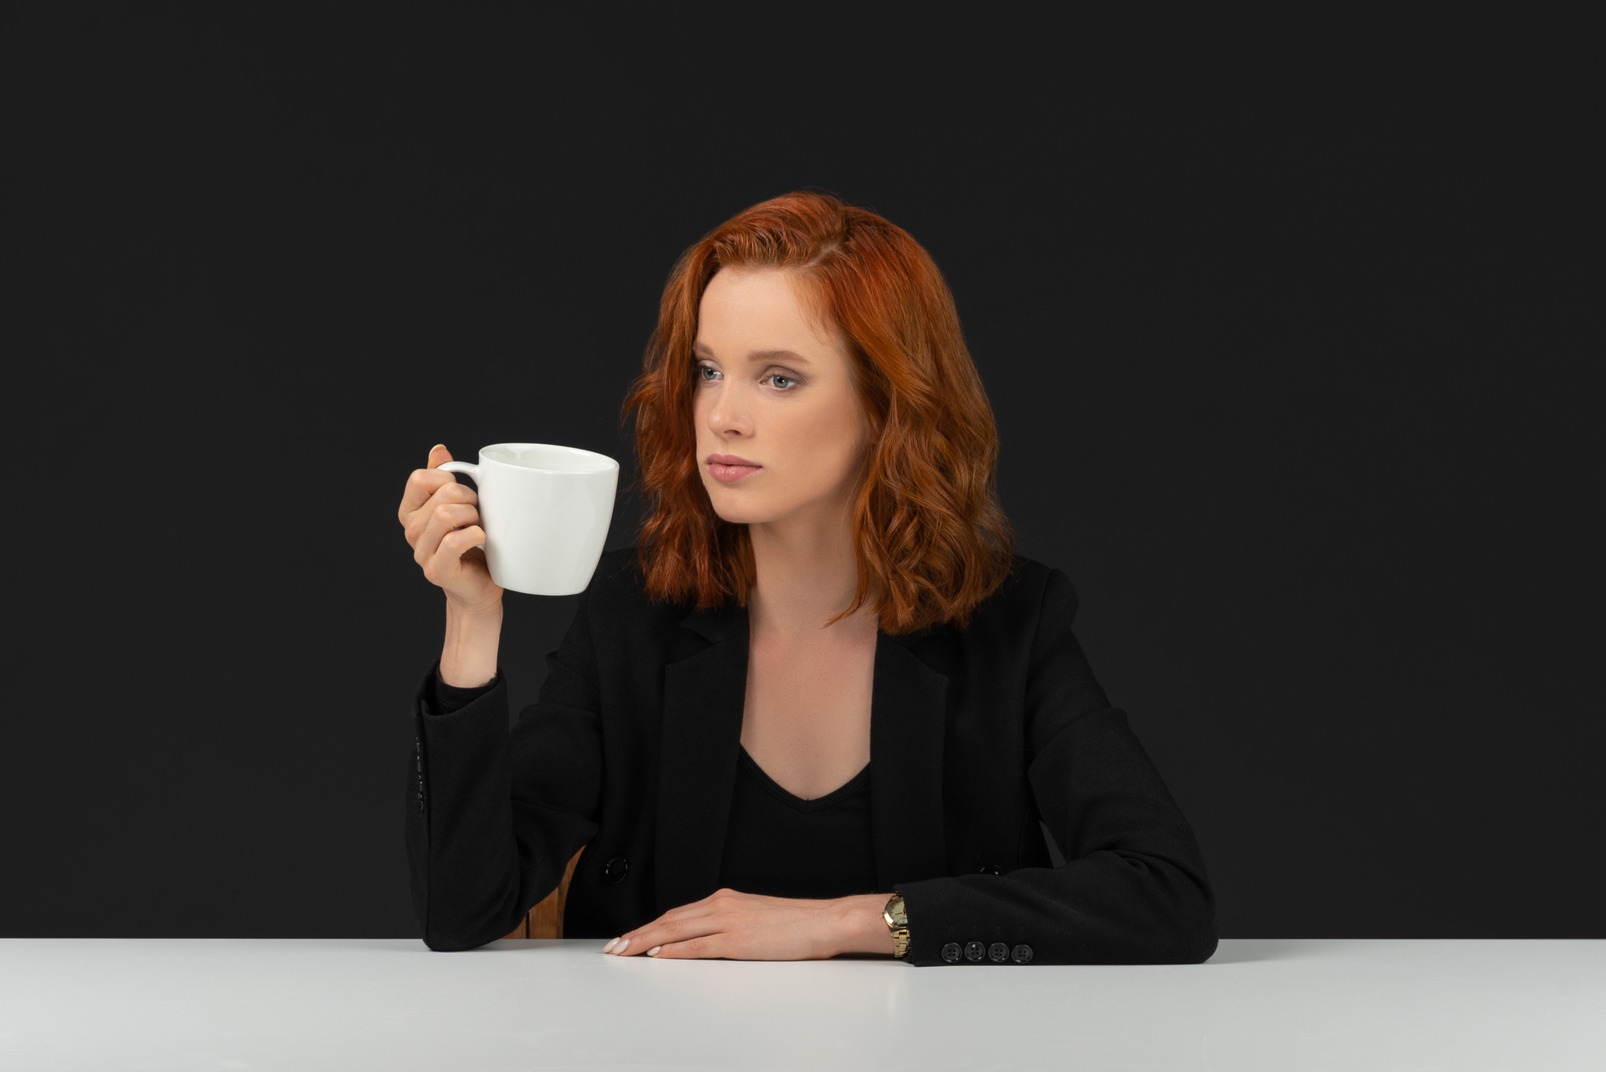 Good looking young woman dressed in black and drinking coffee